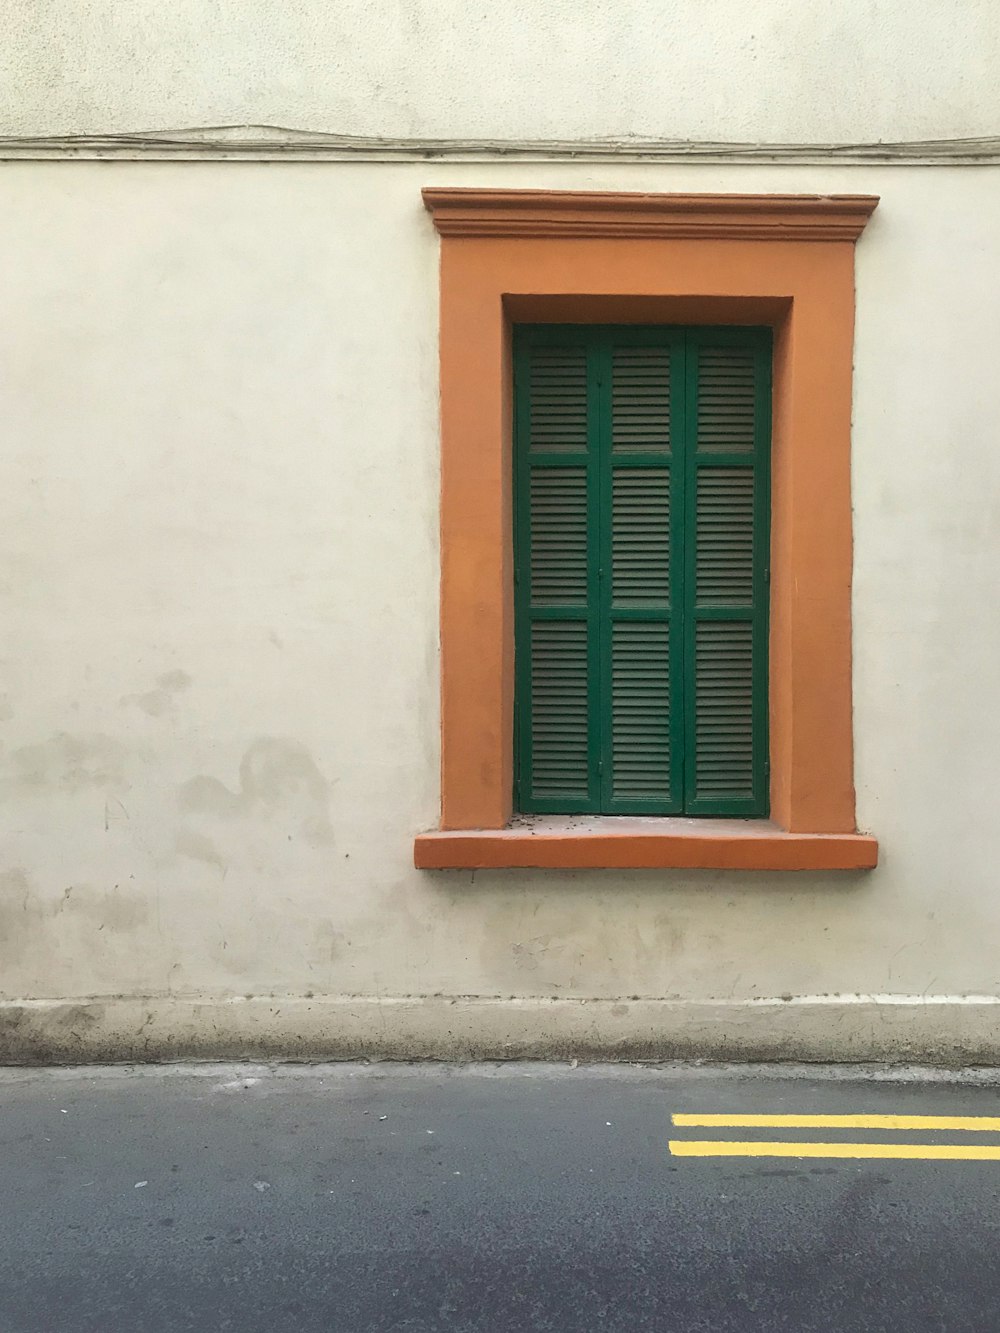 an orange and green window on the side of a building